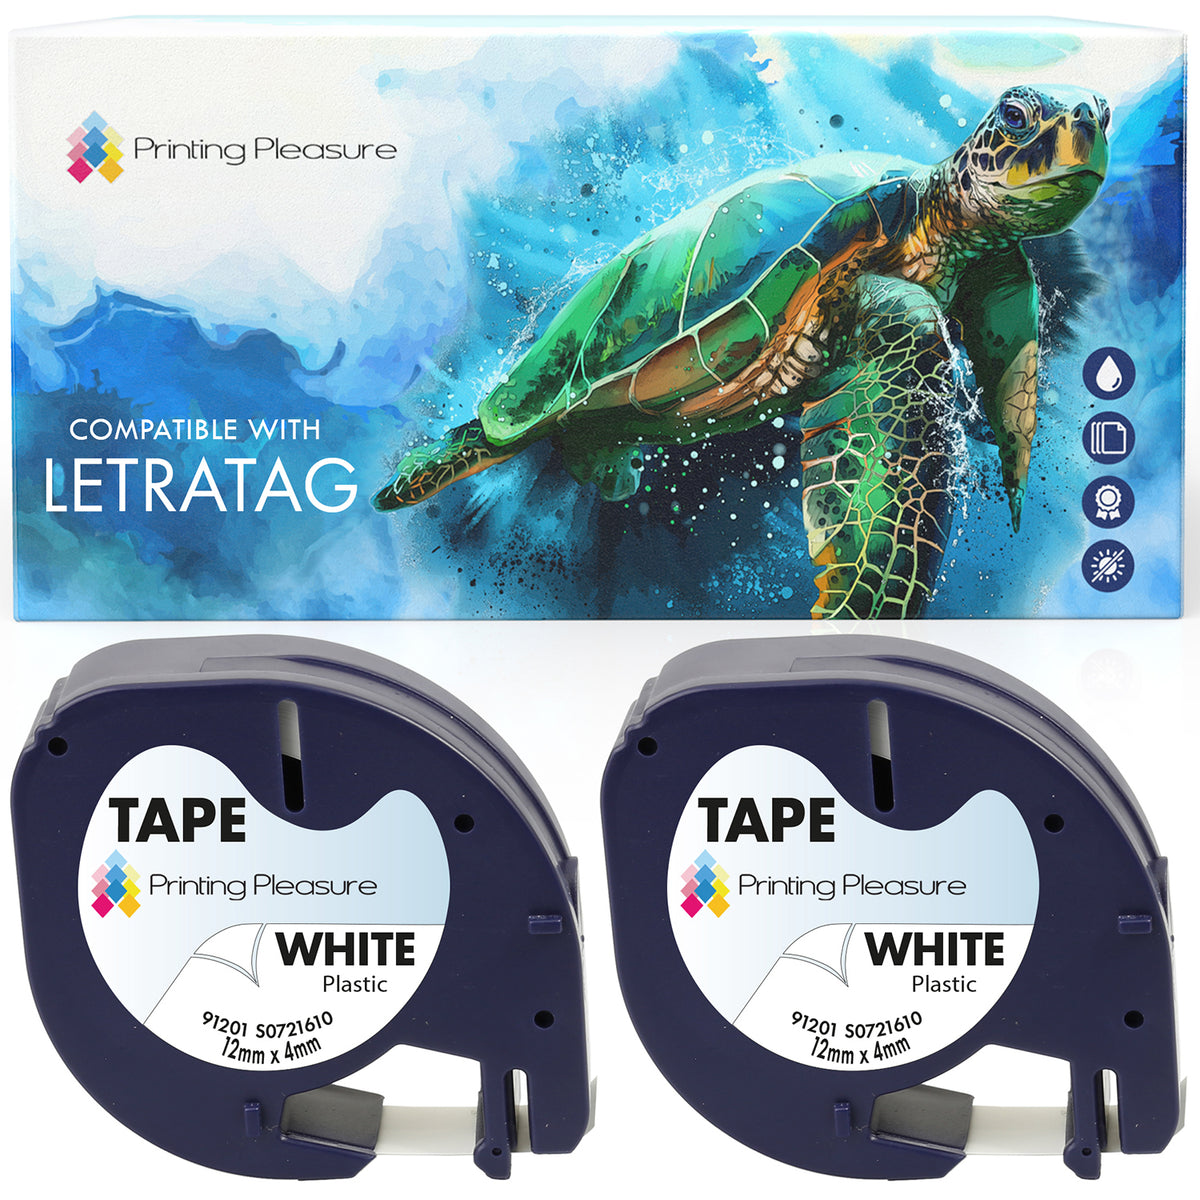 Compatible with Dymo LetraTag 91201 Plastic Label Tape – Printing